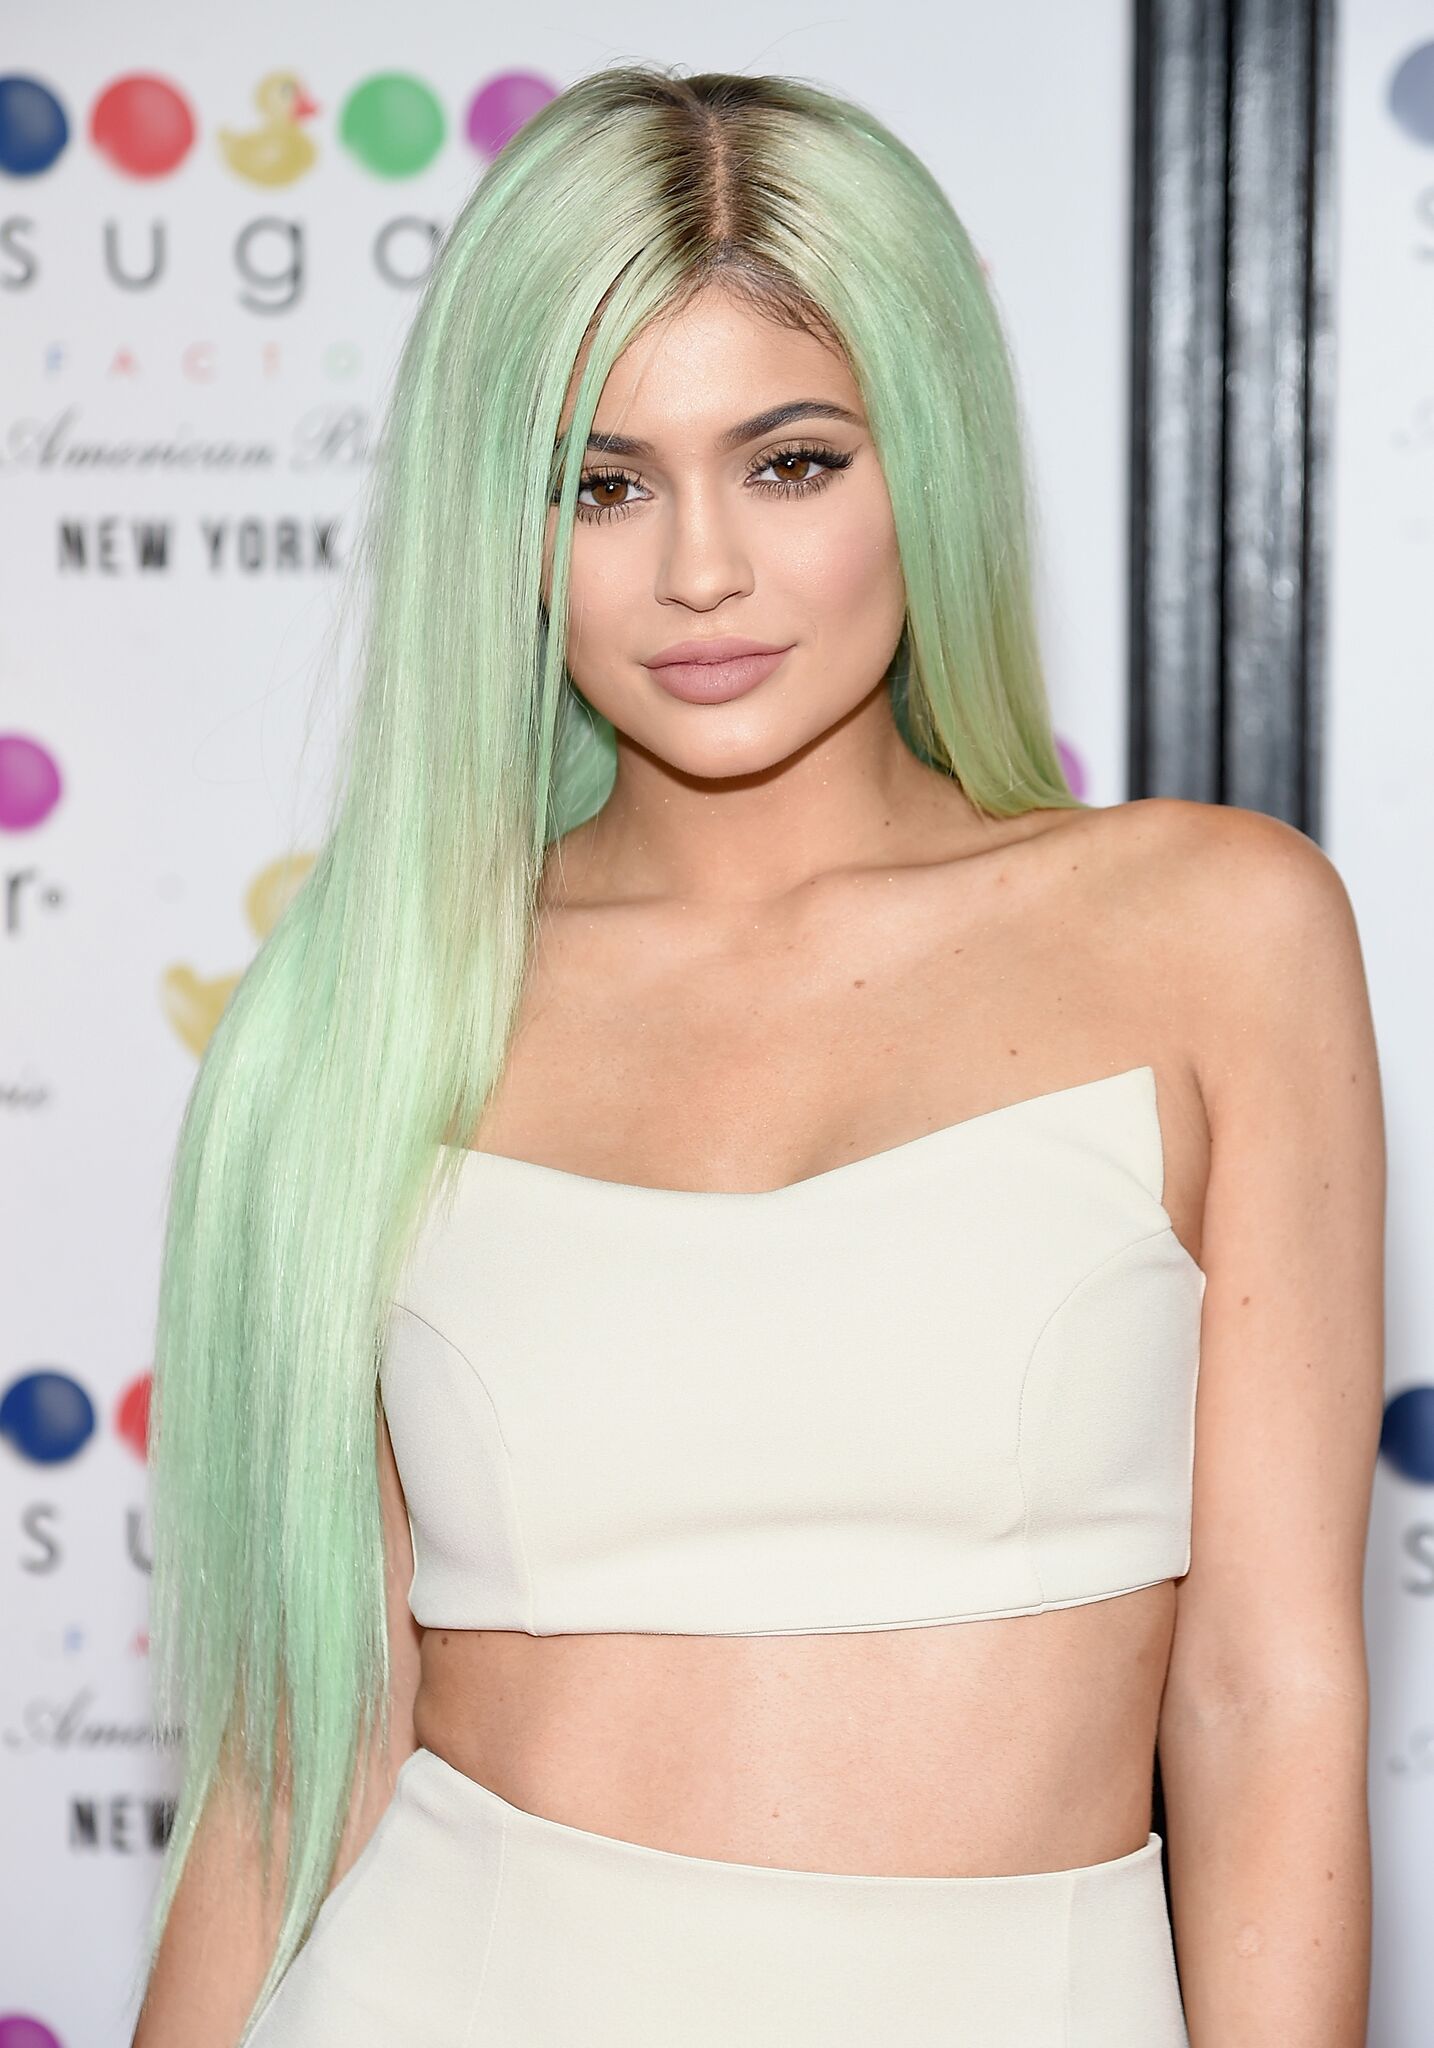 Kylie Jenner attends the Grand Opening of the Sugar Factory American Brasserie  | Getty Images